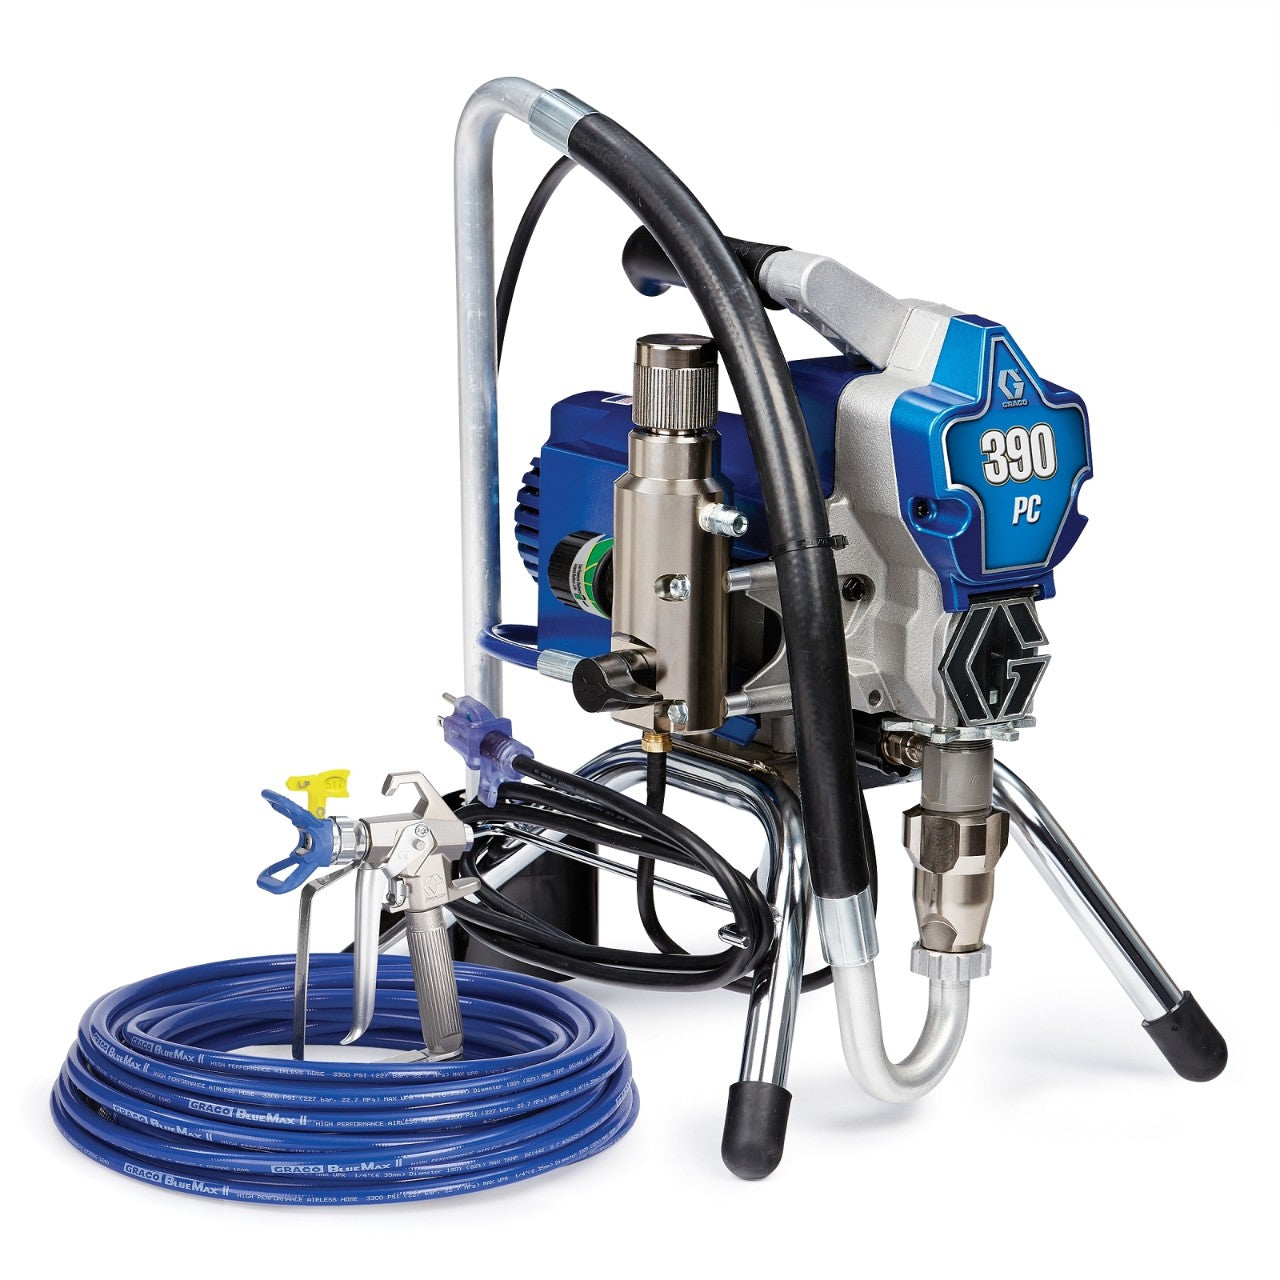 GRACO 390 PC Stand Electric Airless Sprayer